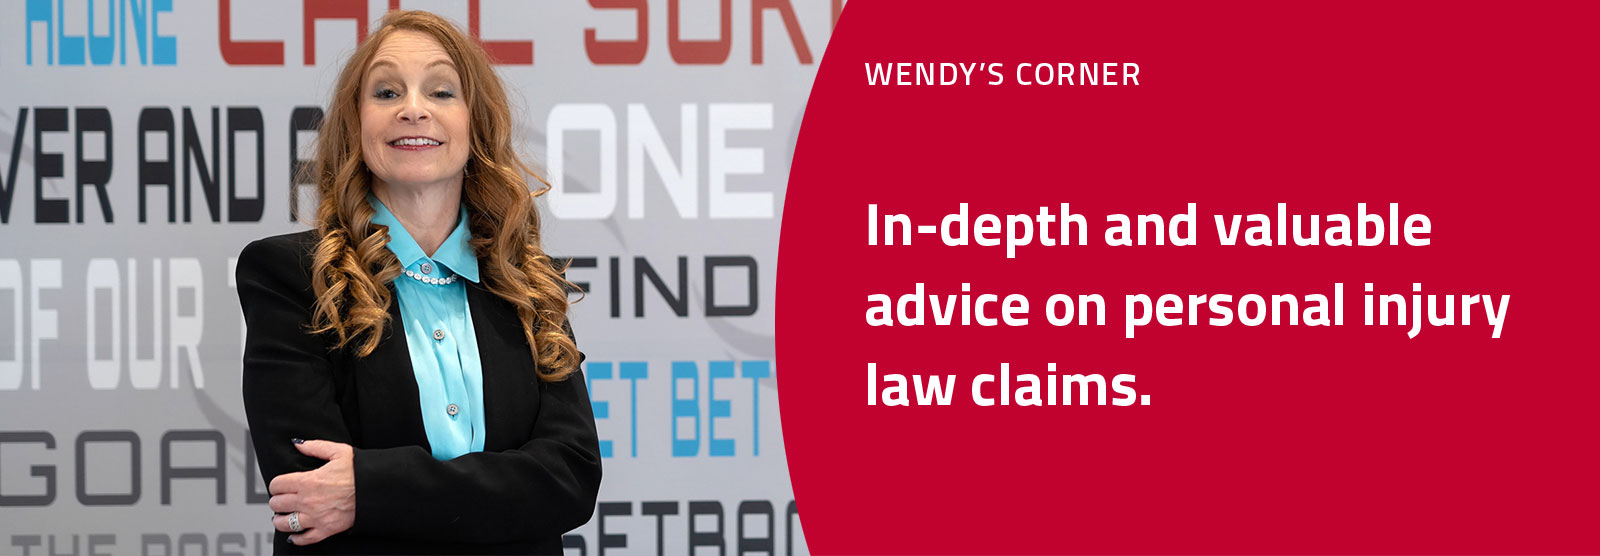 Wendy's Corner - In-depth and valuable advice on personal injury law claims.